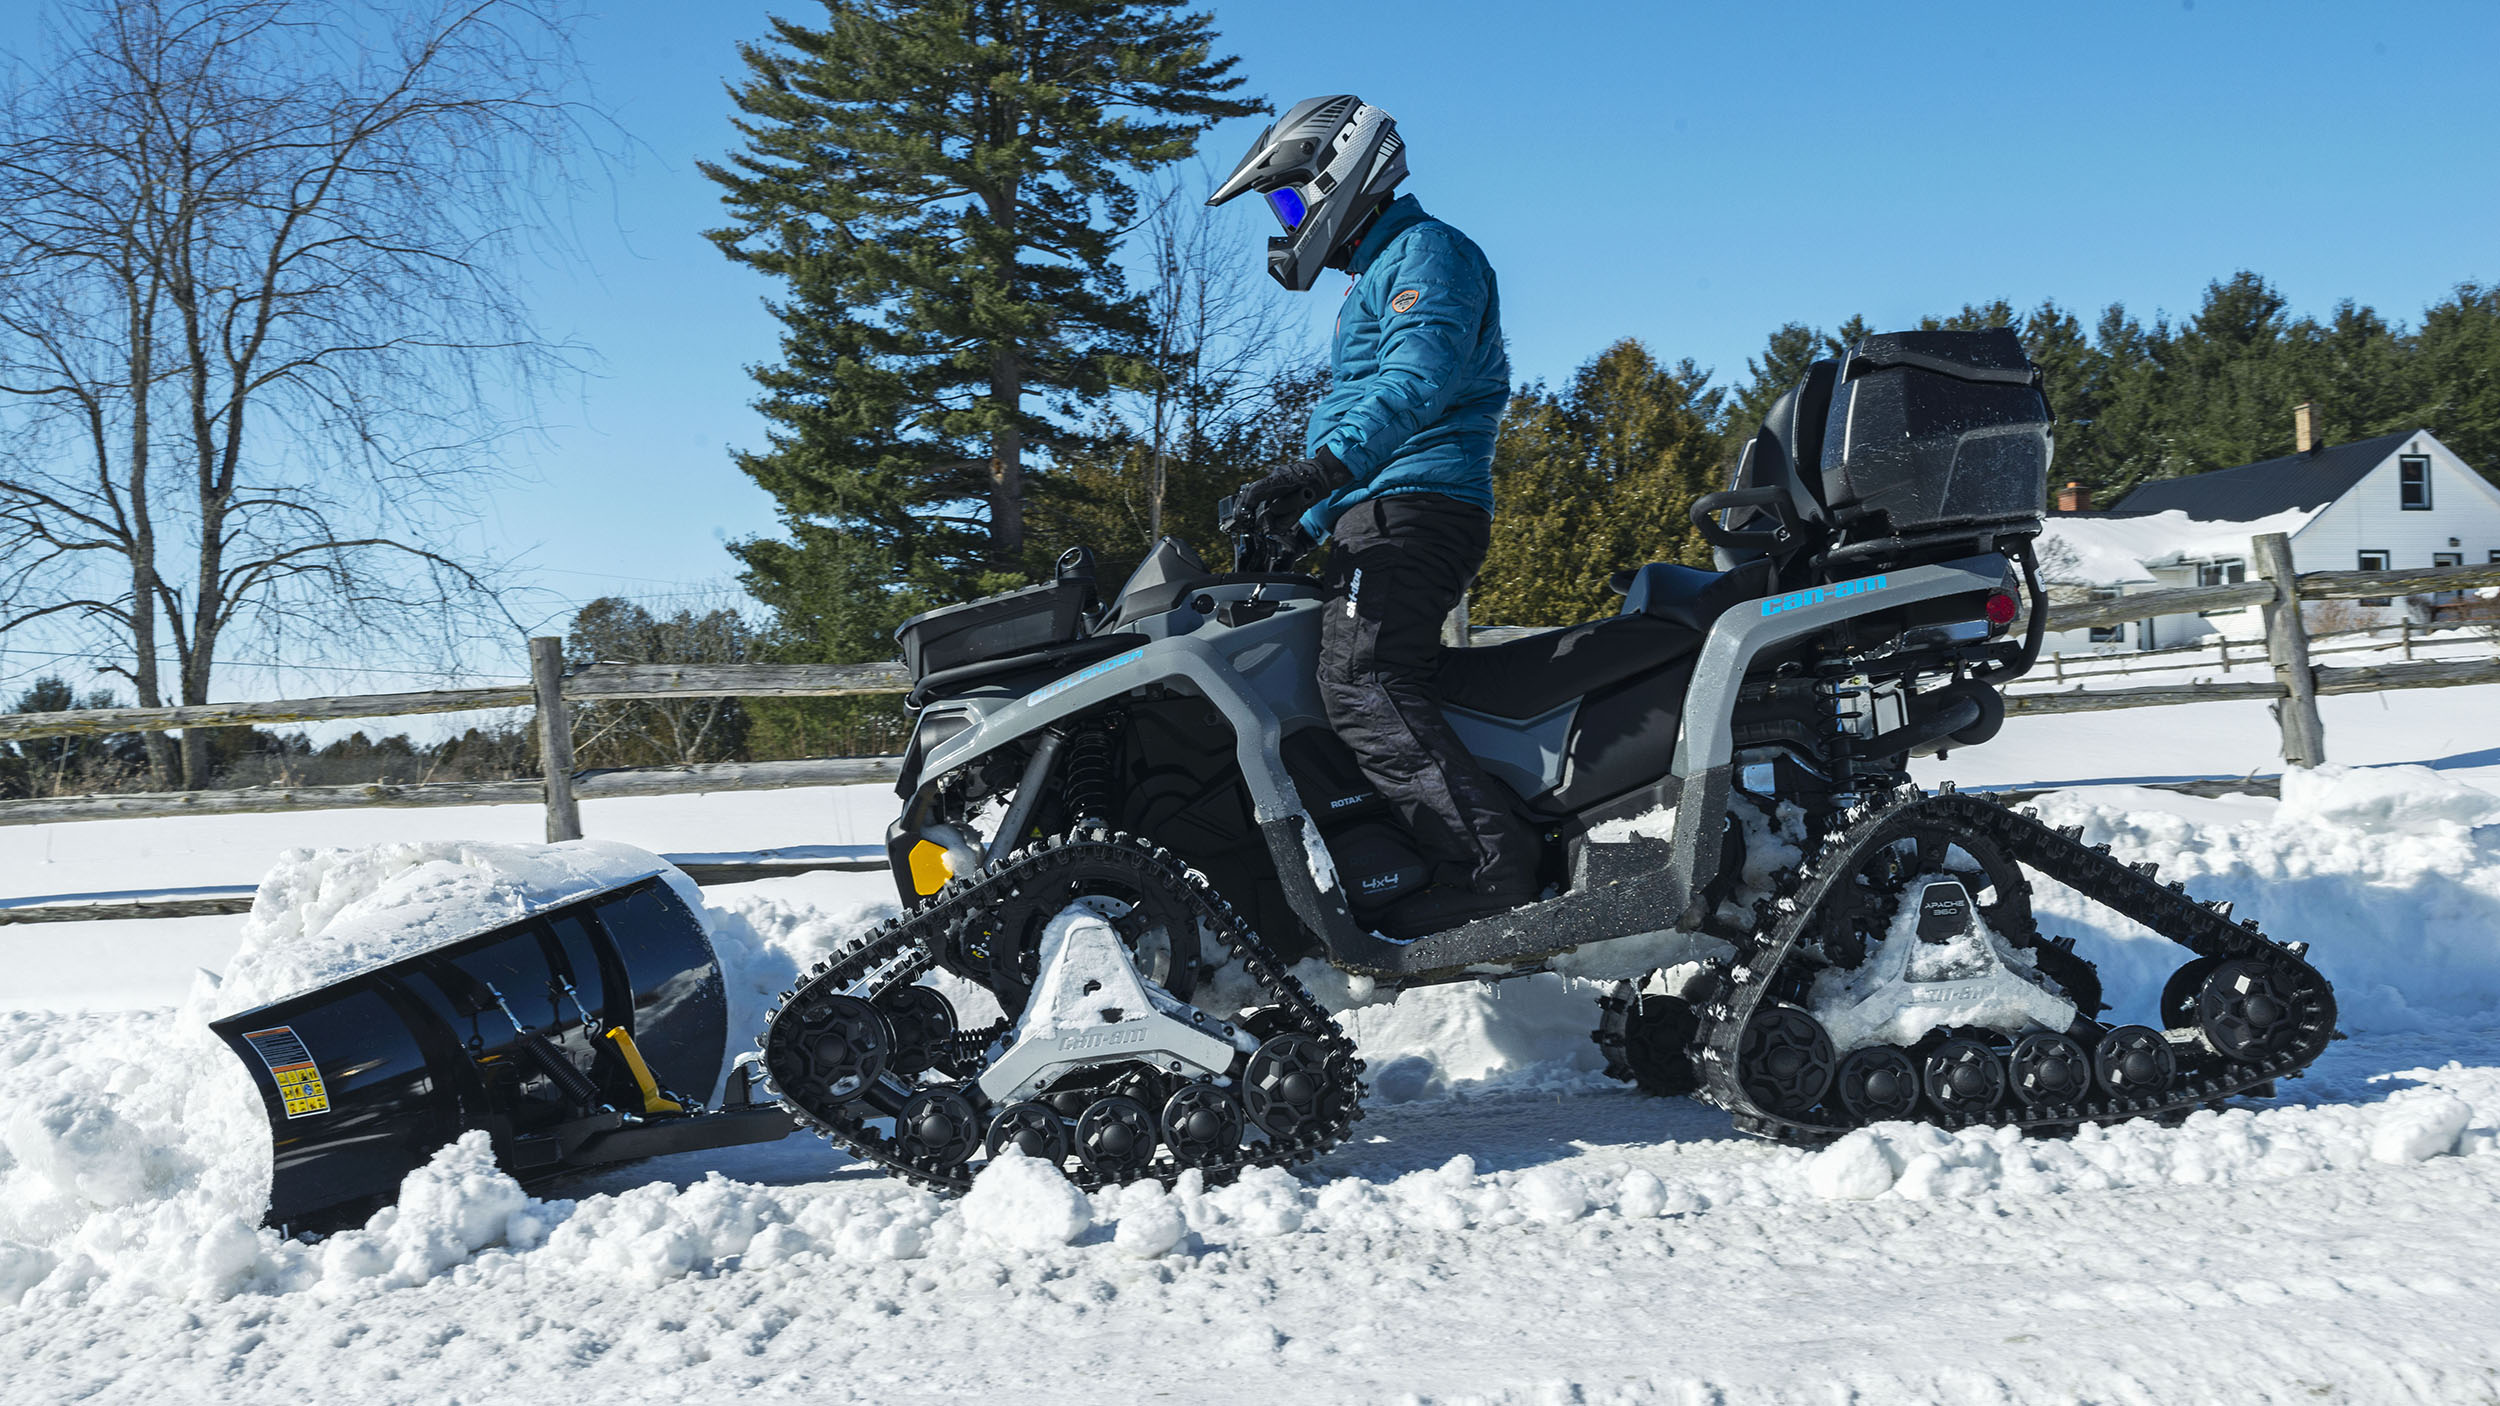 Using your SxS/UTV or ATV for plowing snow and fun in winter